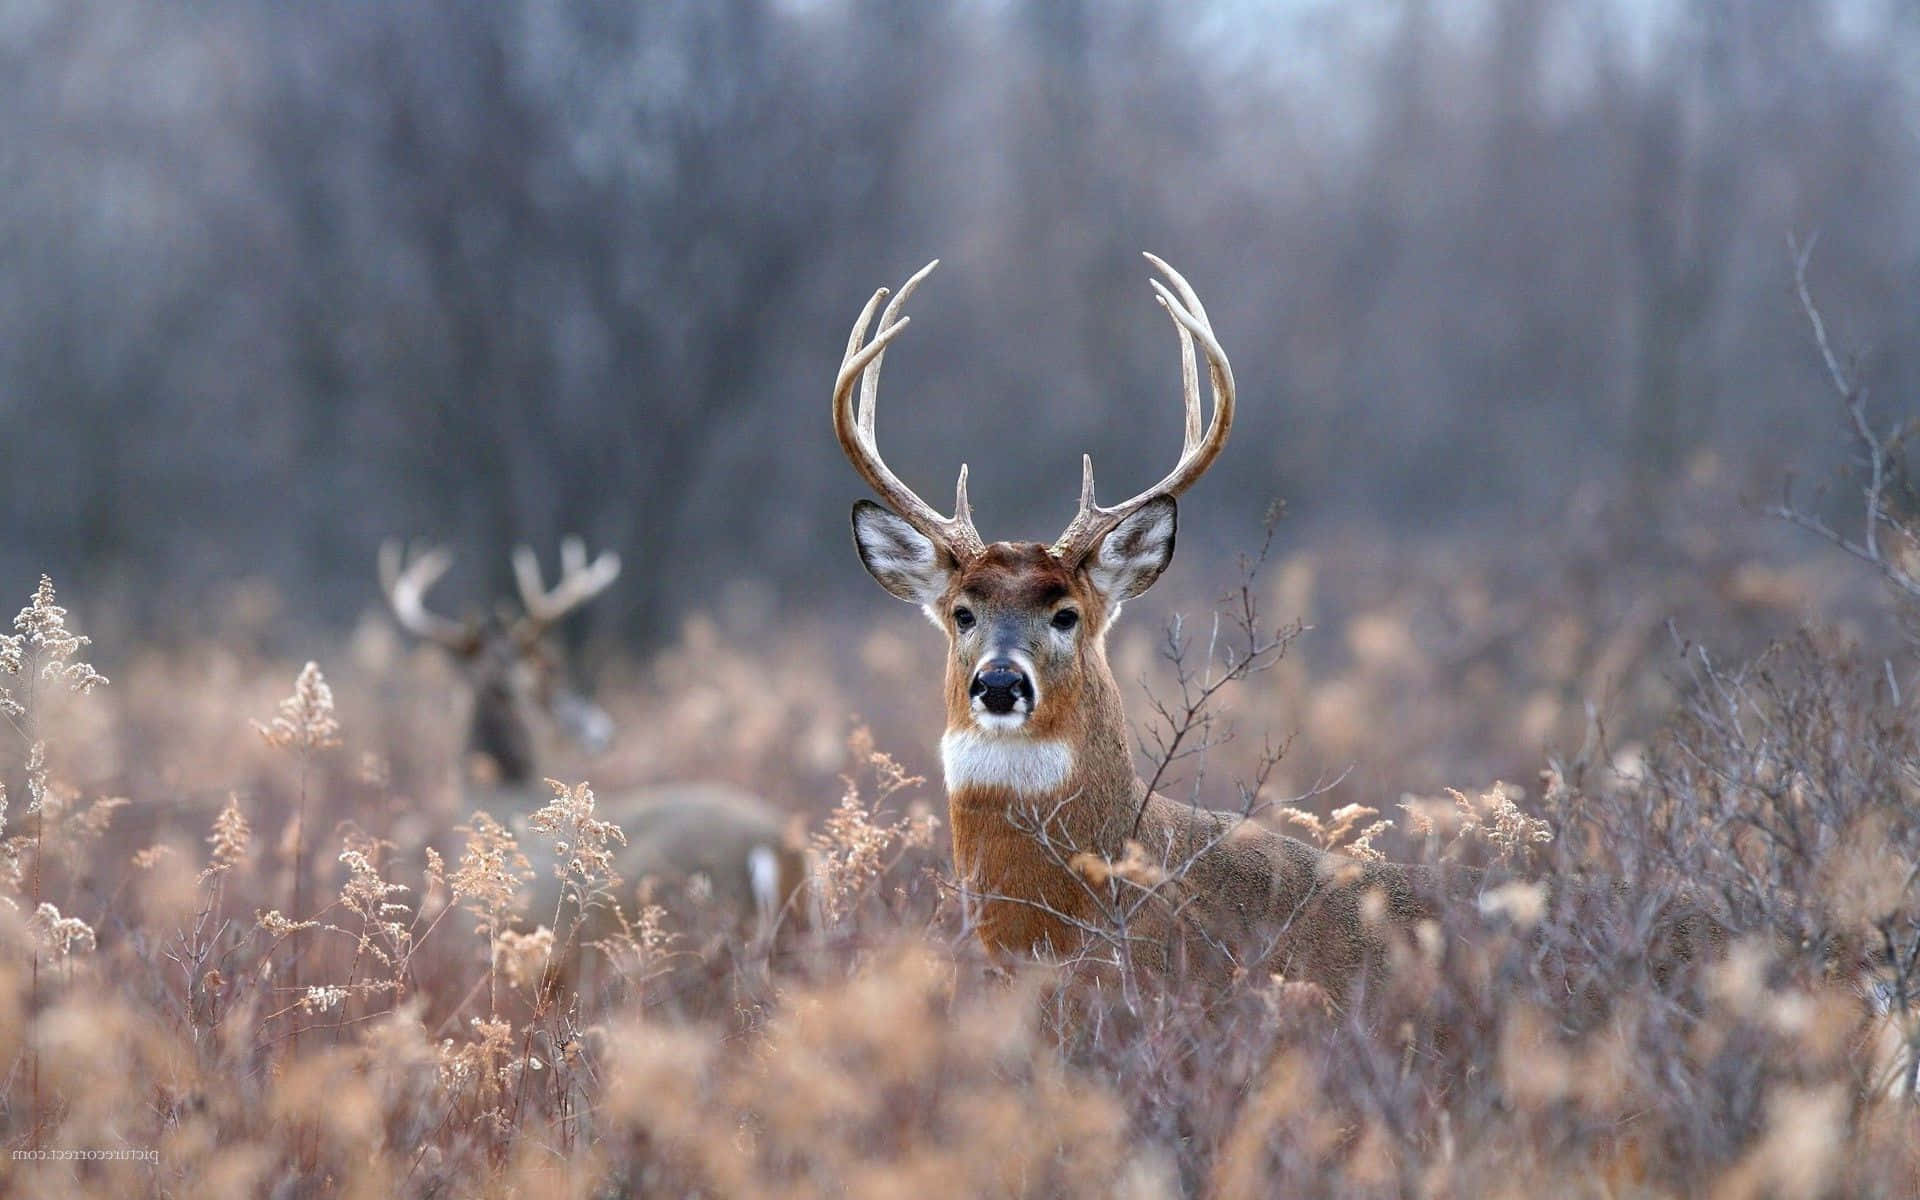 Add a peaceful, natural touch to your desktop with this stunning Deer Desktop wallpaper Wallpaper